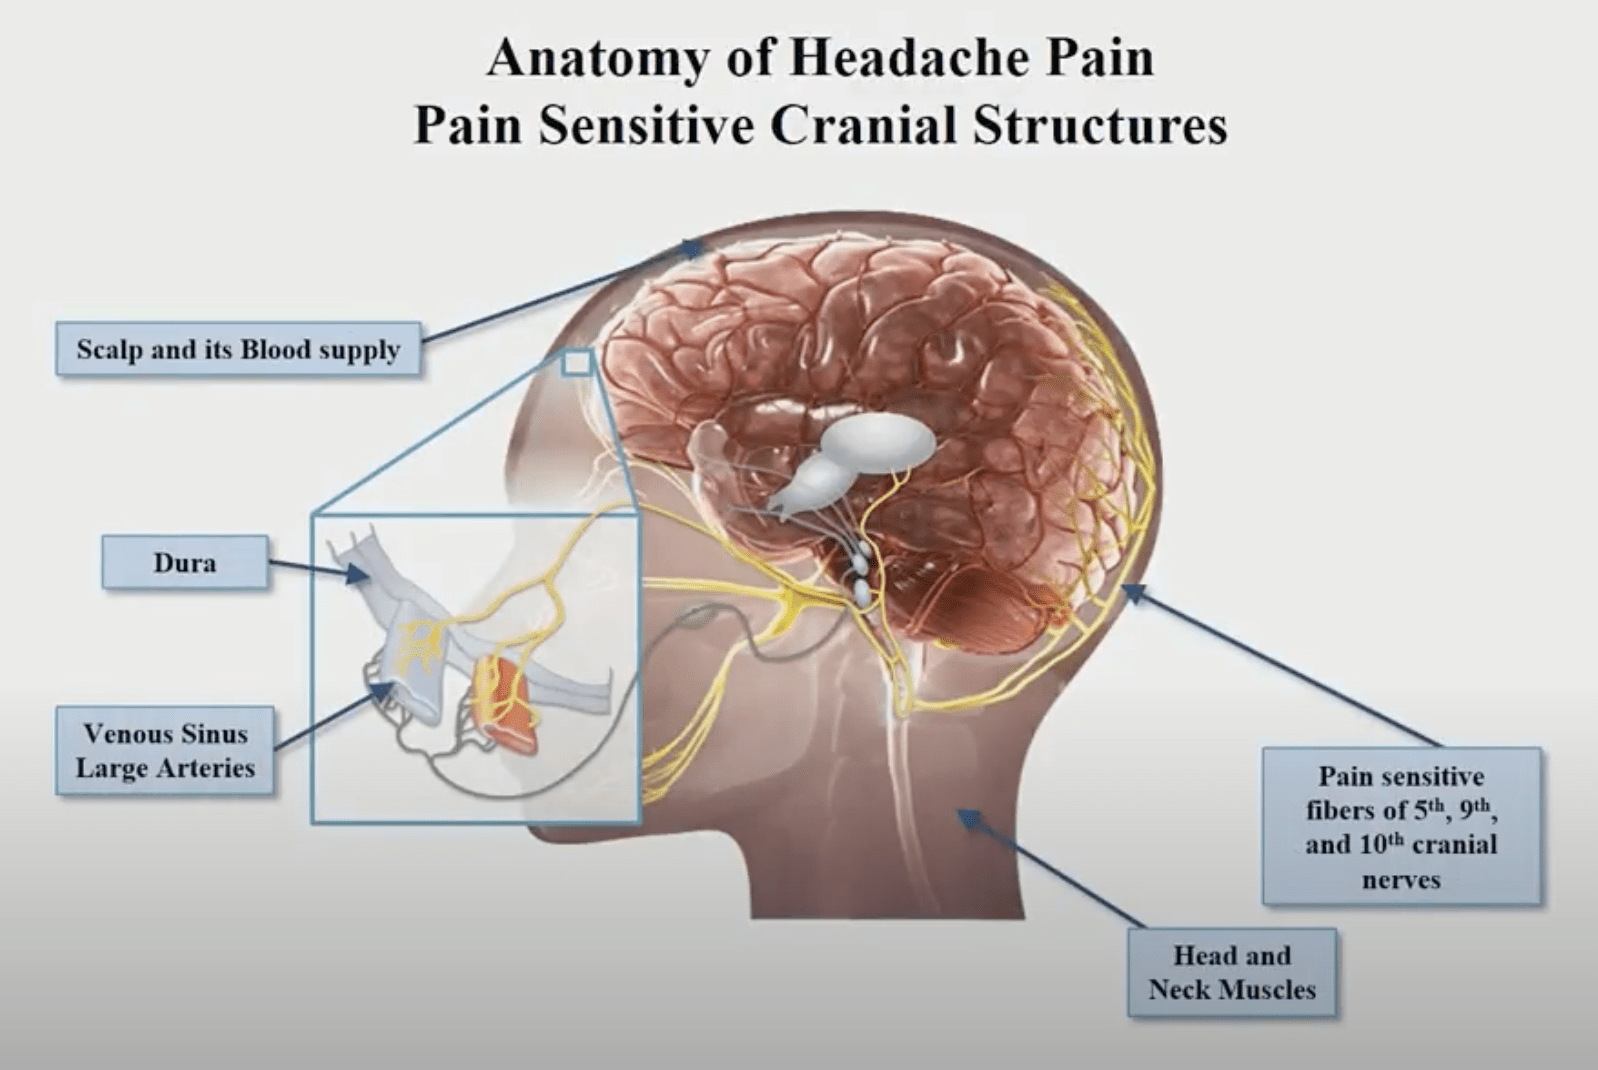 A medical diagram showing the anatomy of pain-sensitive cranial structures